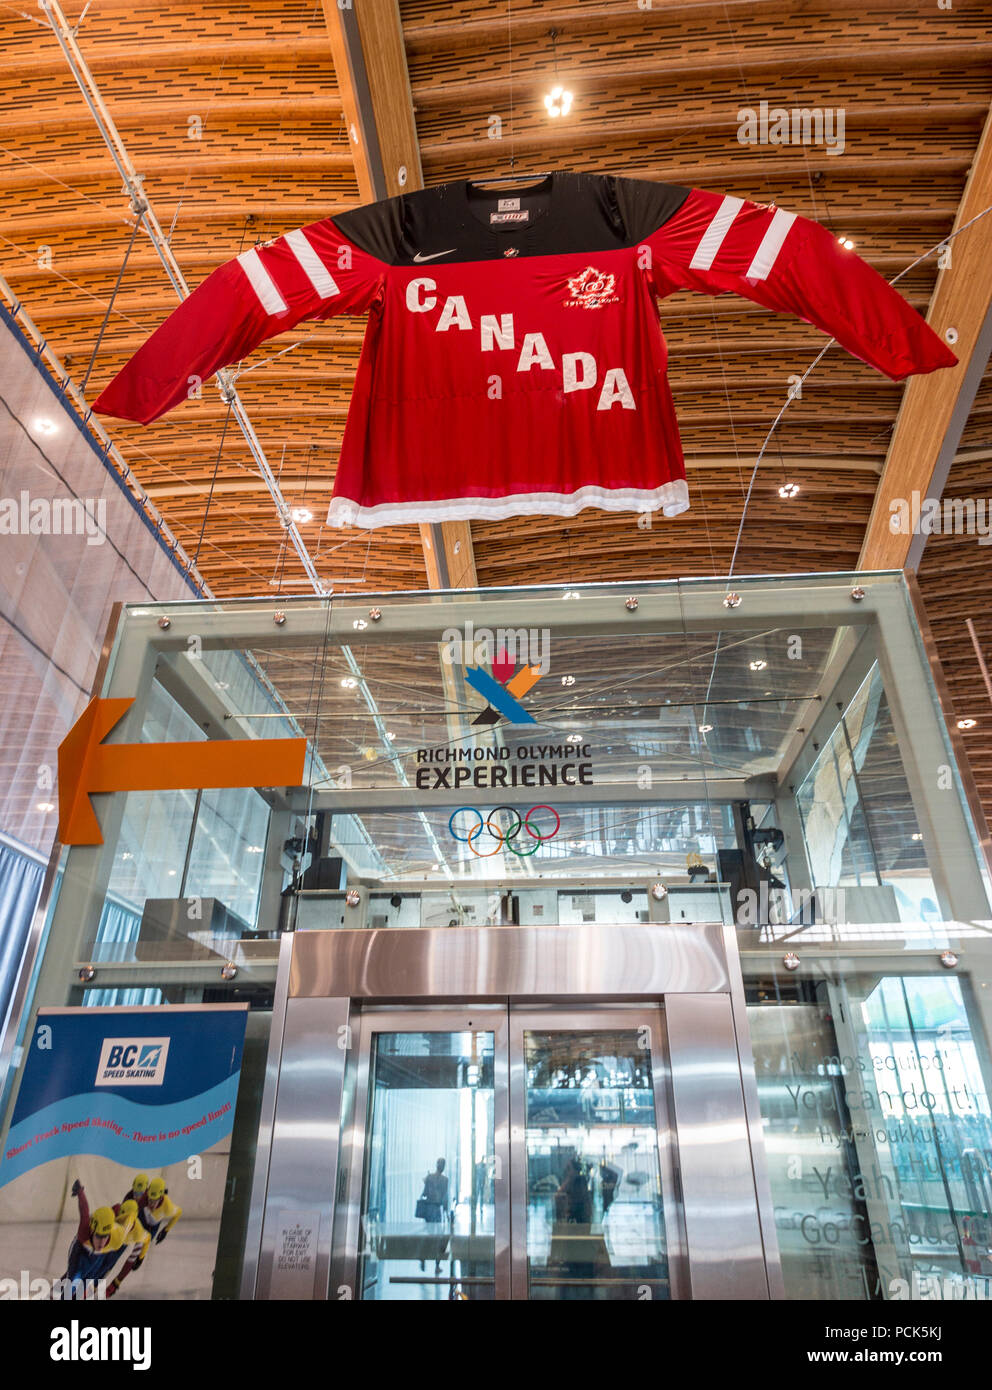 The Richmond Olympic Oval, an athletic center originally built for the 2010 Winter Olympics. Today it has a gym, complete with climbing wall and the Olympic Experience, a museum with Olympic memorabilia and interactive rides for folks who want to try feeling like an Olympic athlete. Stock Photo